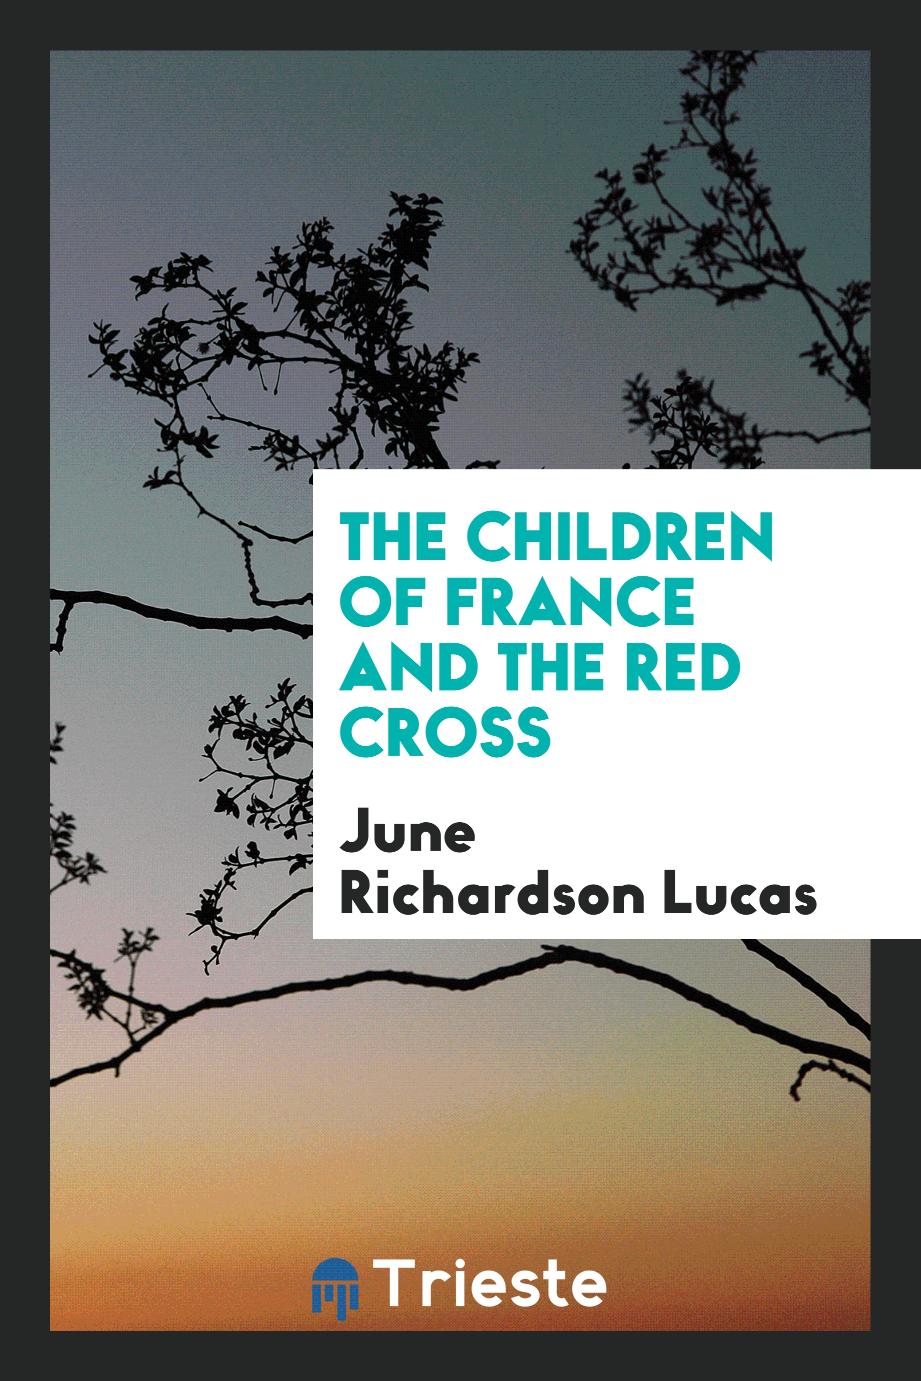 The children of France and the Red cross